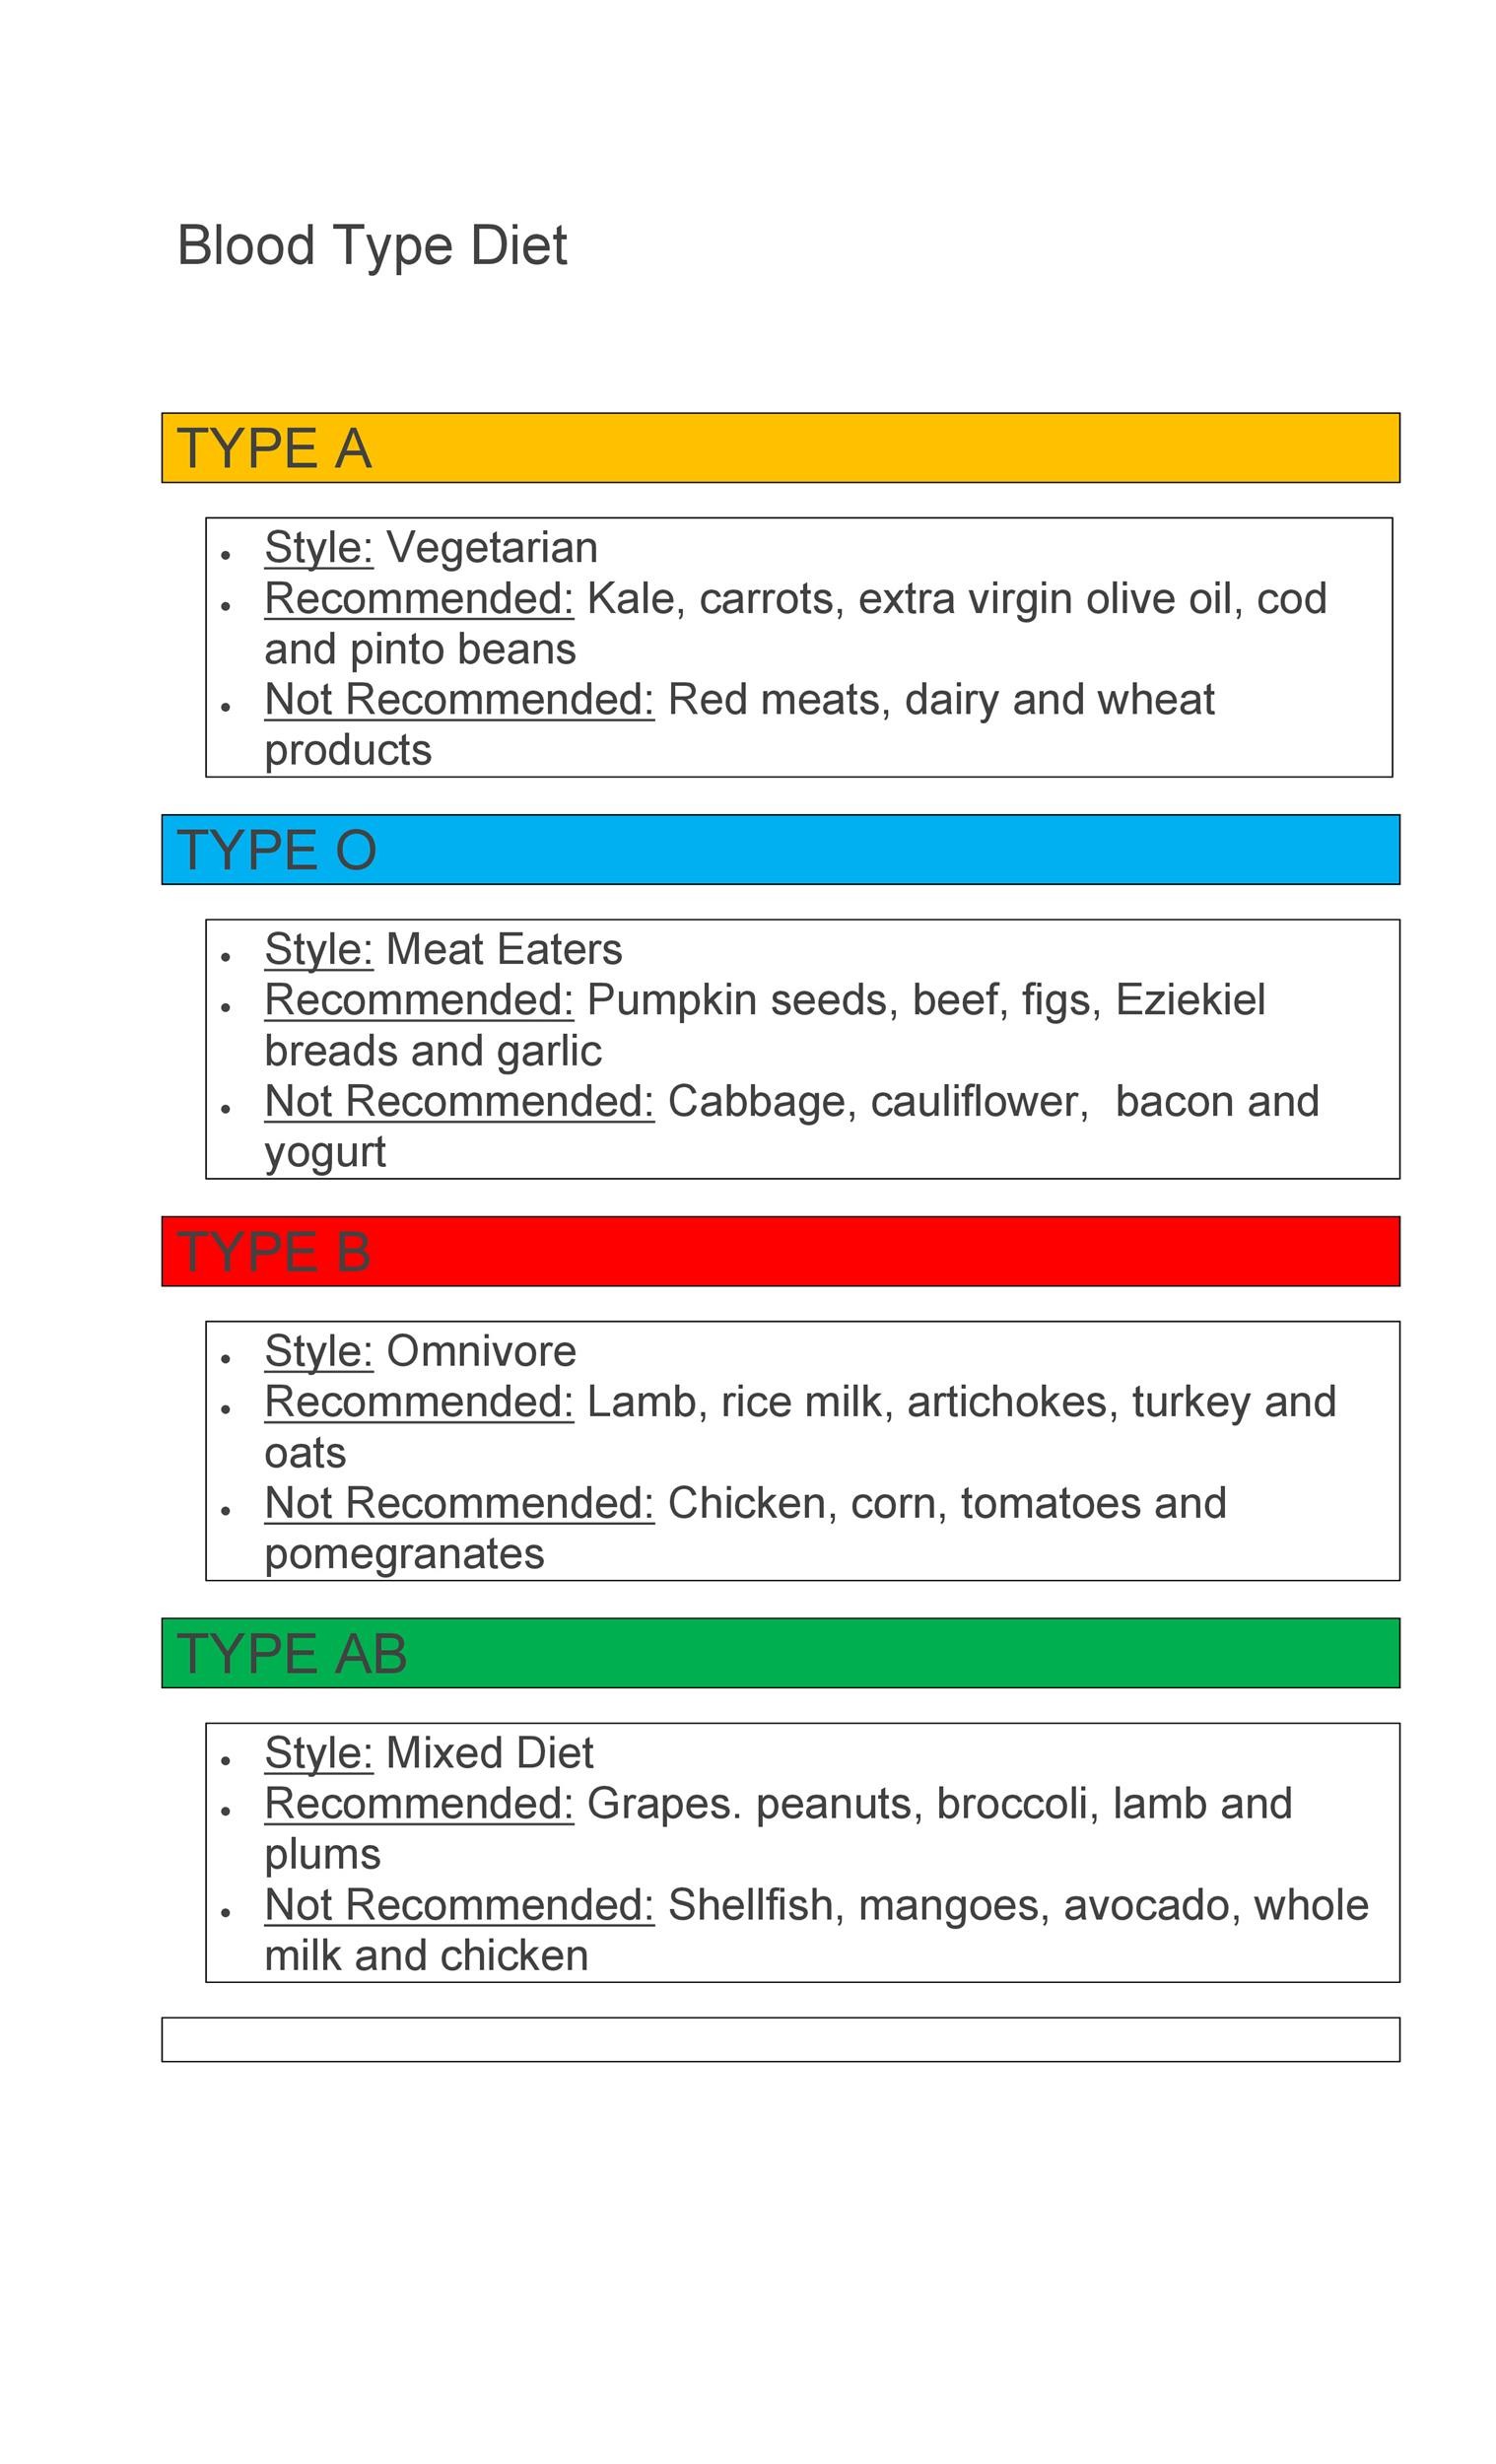 Blood Type A Diet Recommendations